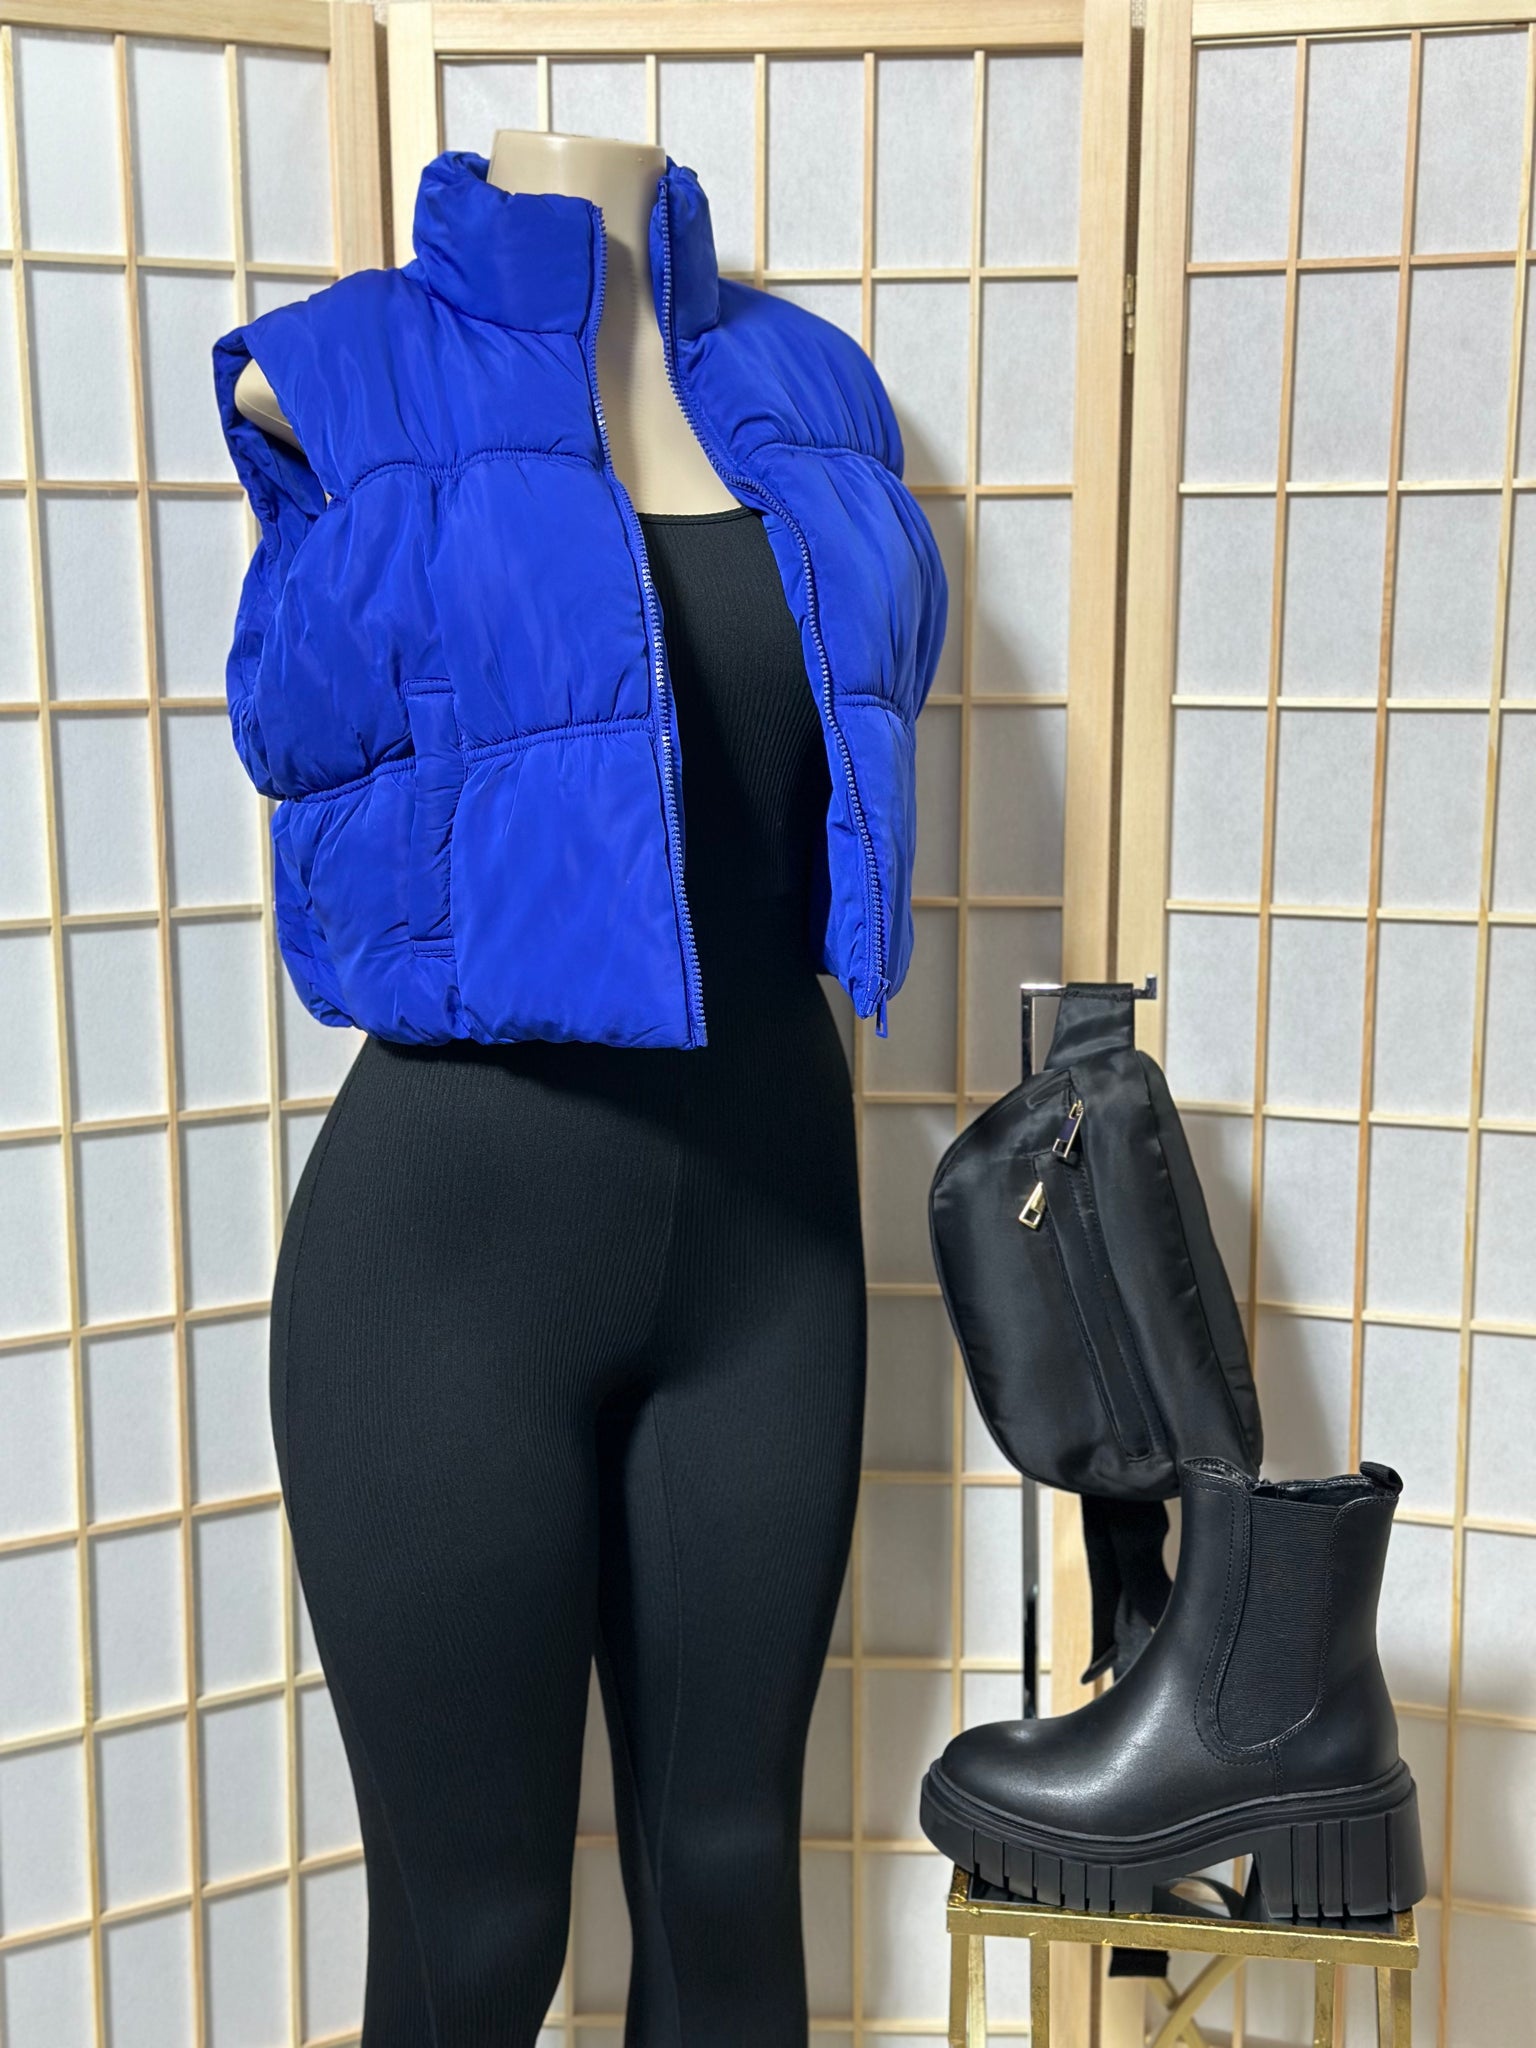 The “Khy Blue” Puffer Vest